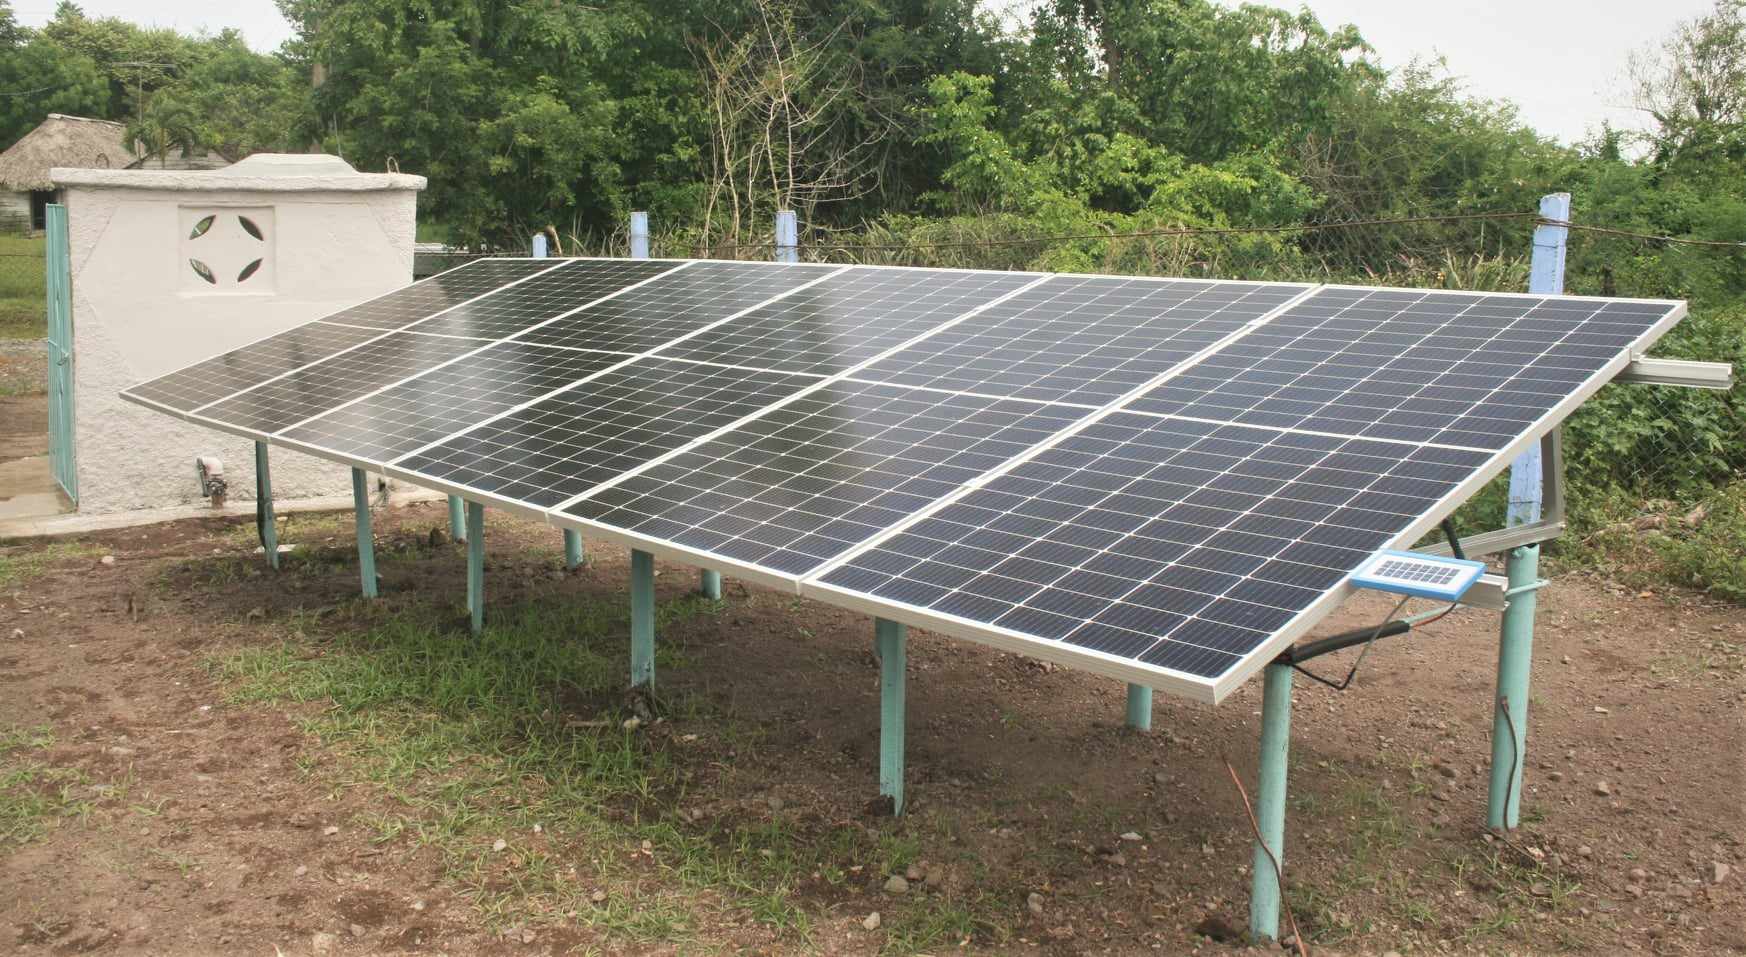 Solar panels to benefit water supply.